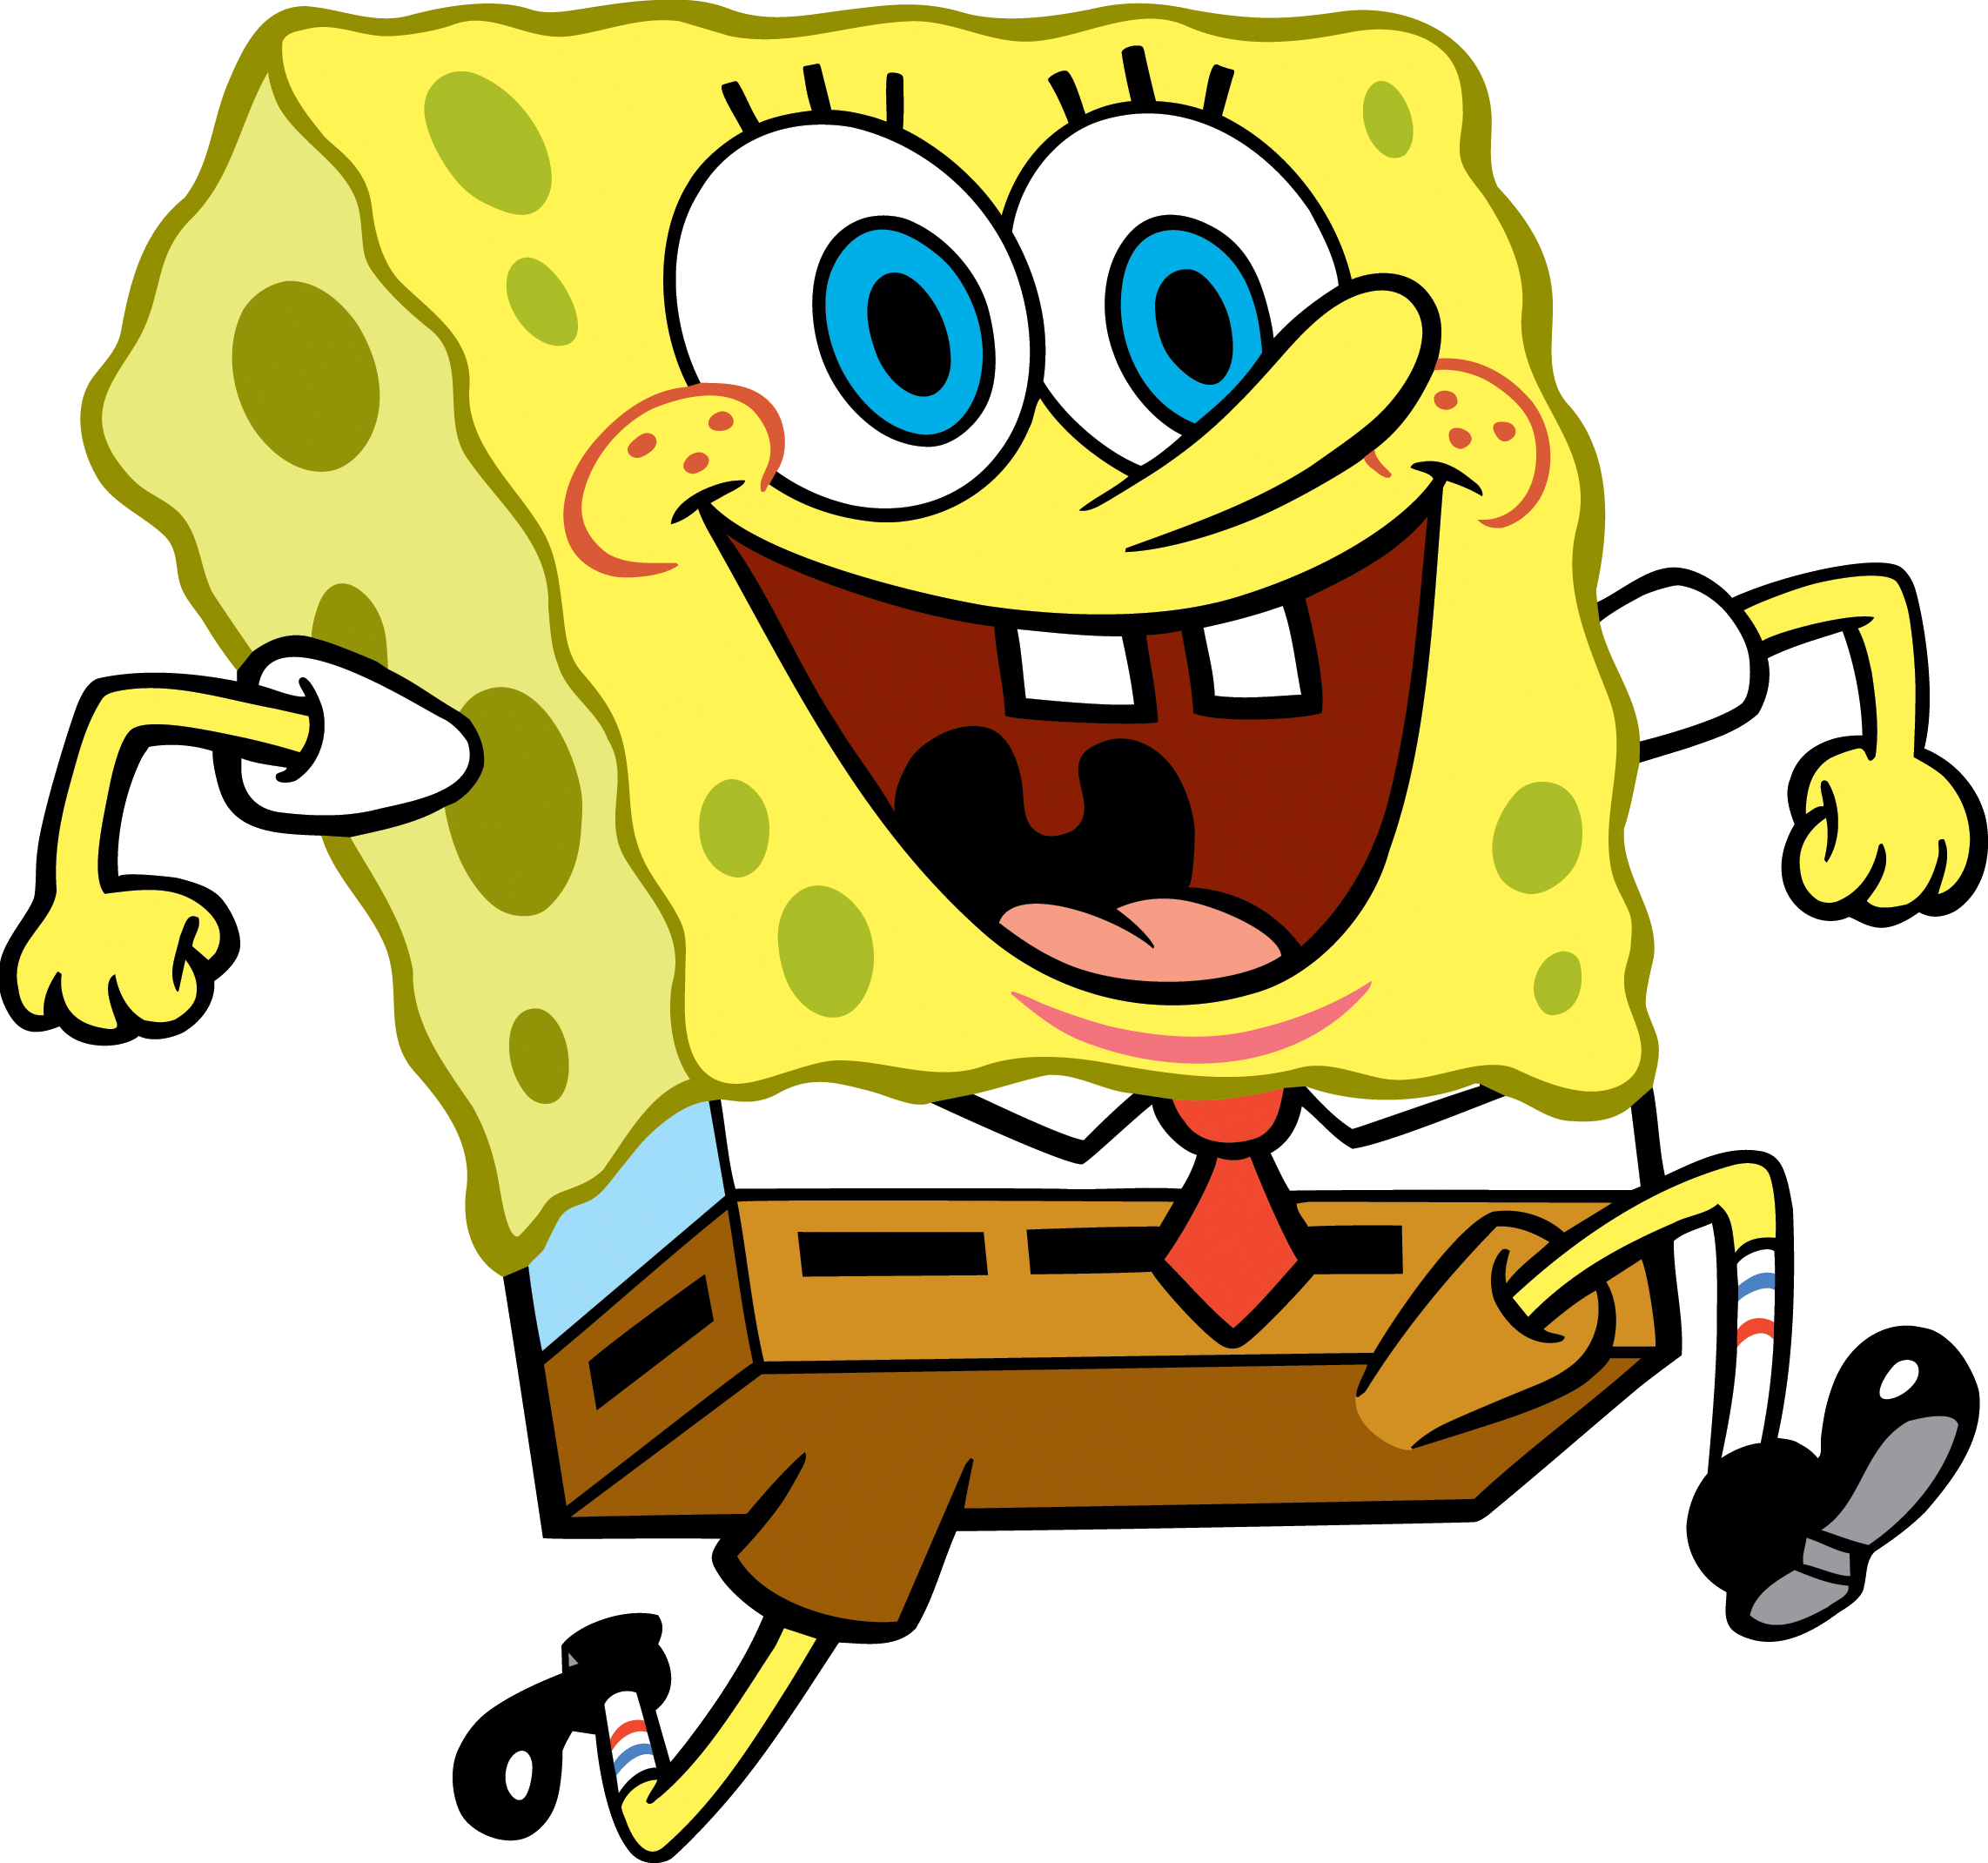 Check out this transparent Spongebob running PNG image